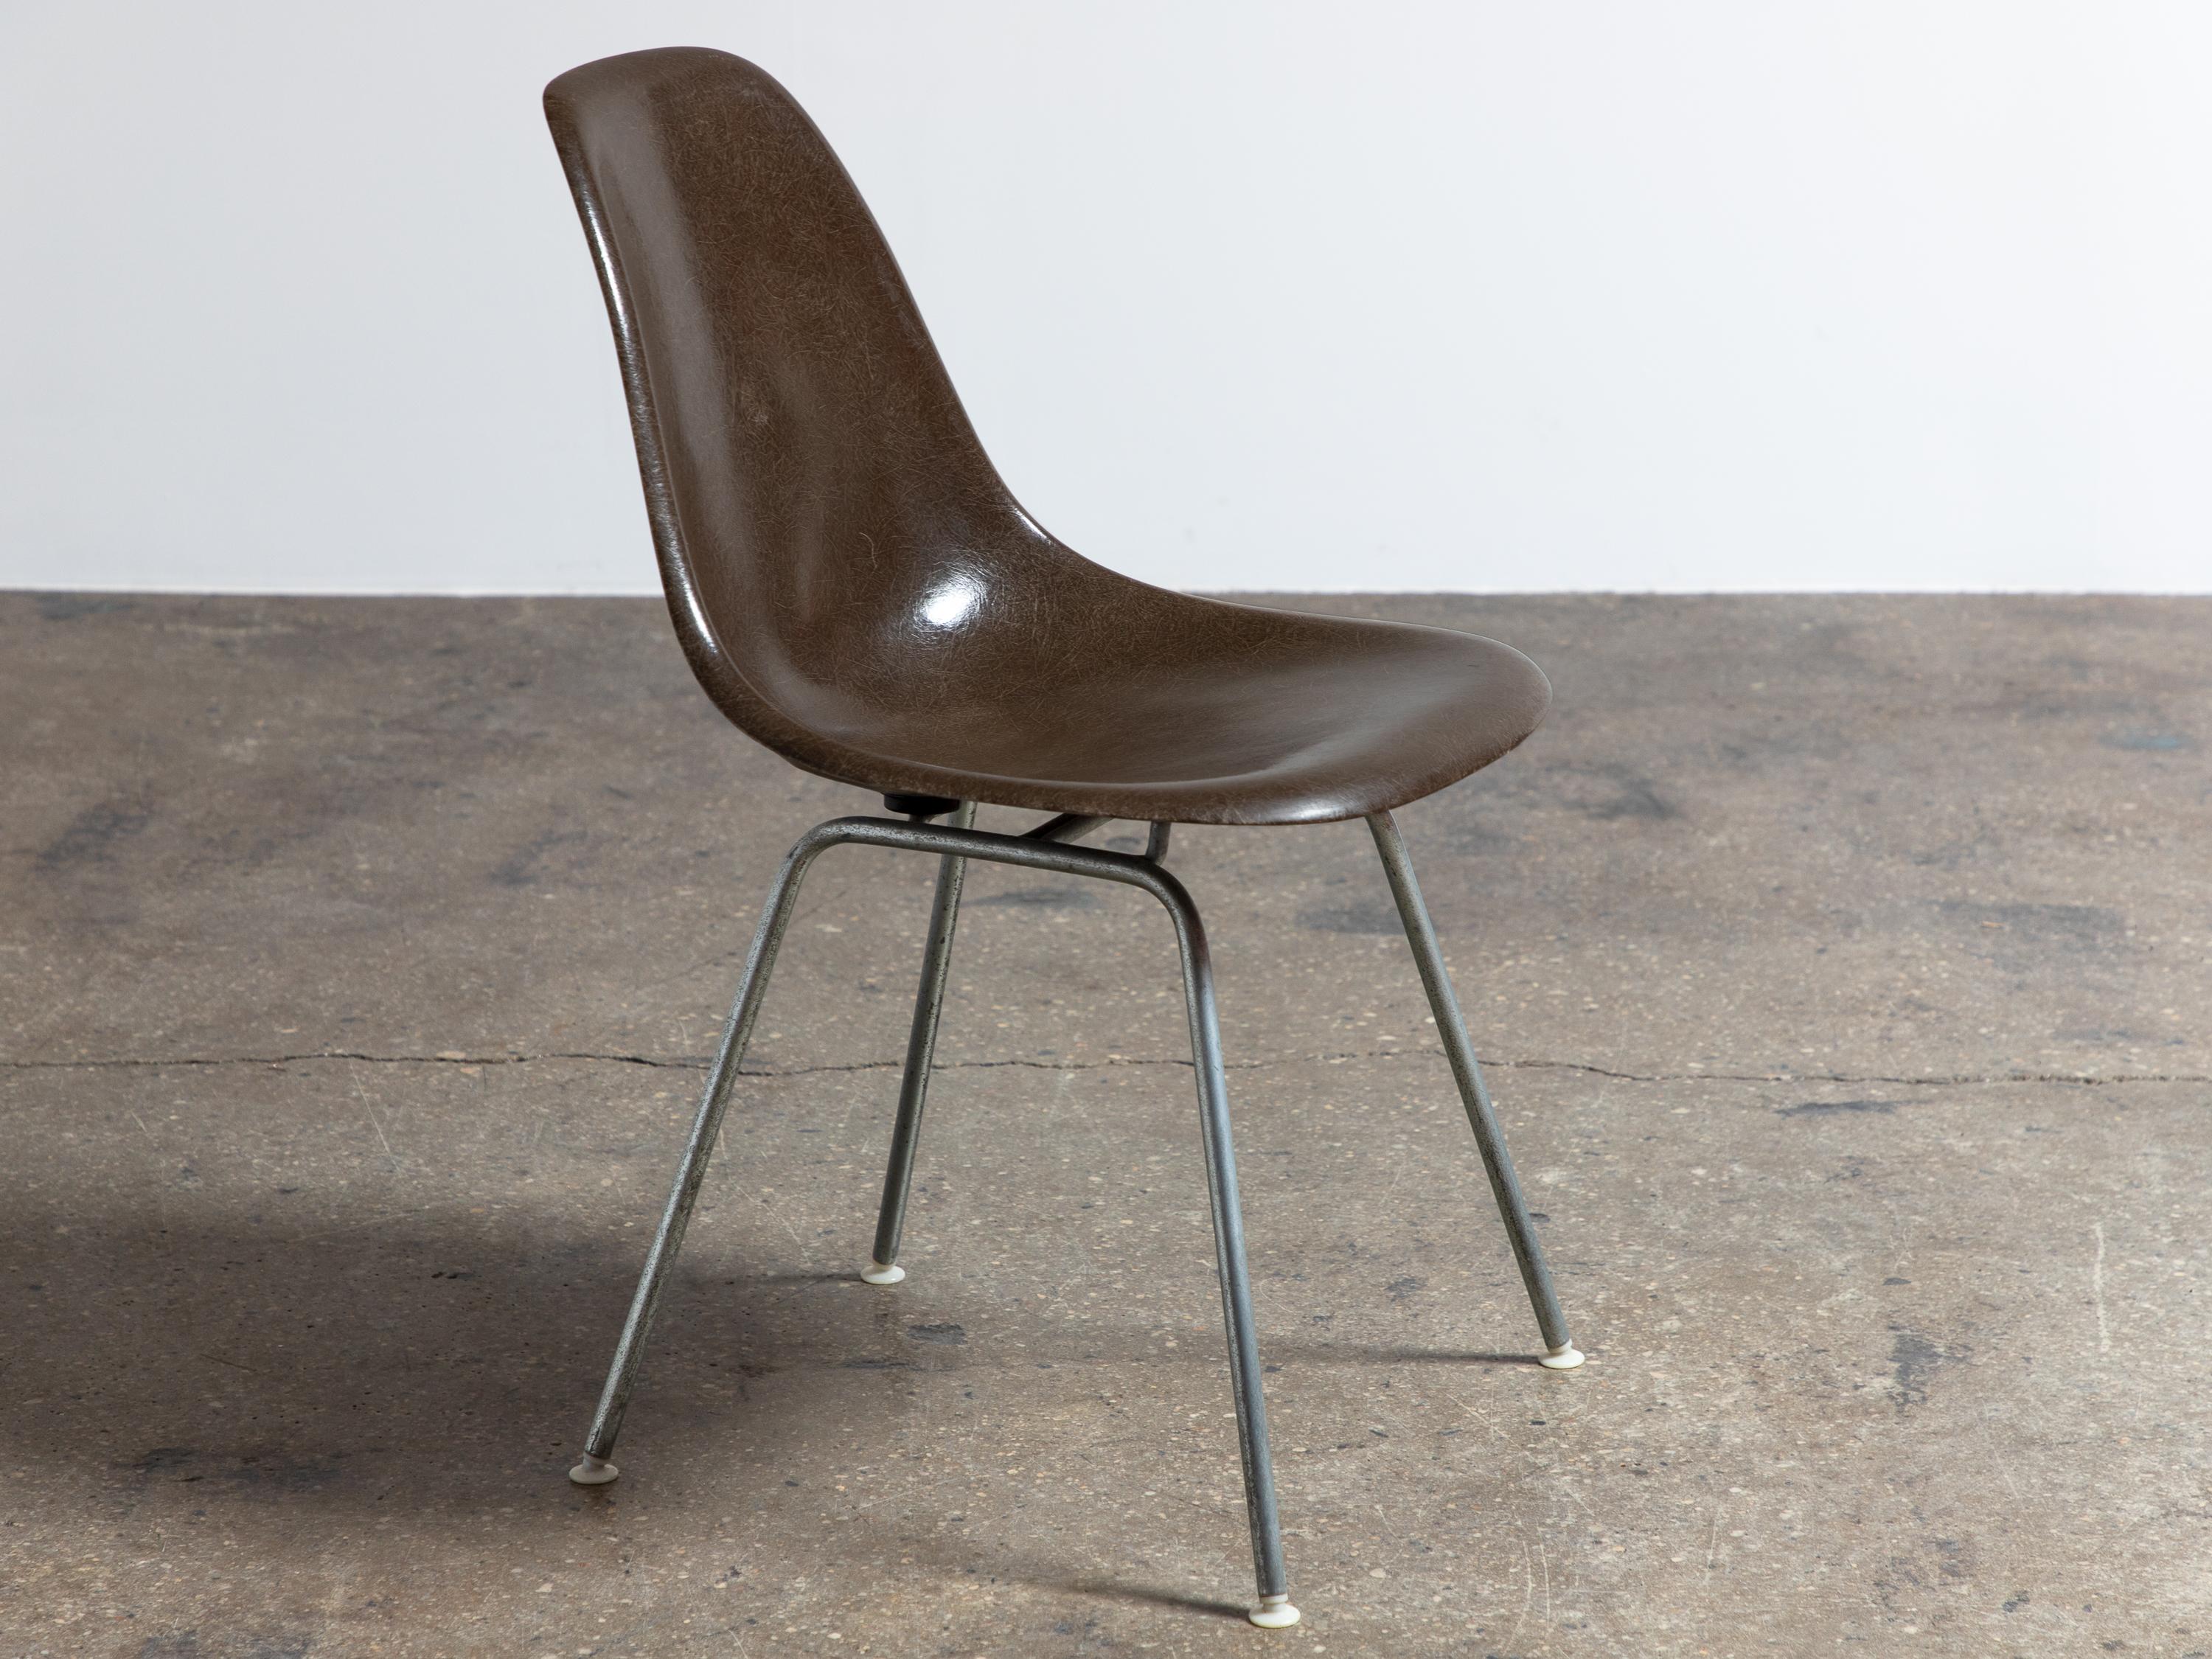 We have eleven original 1960s Eames fiberglass shell chairs with original H bases. Narrow mount. Lovely rich brown color. These have their original finish and are gorgeous, gleaming, and super thready. All chairs are stamped. Additional base styles